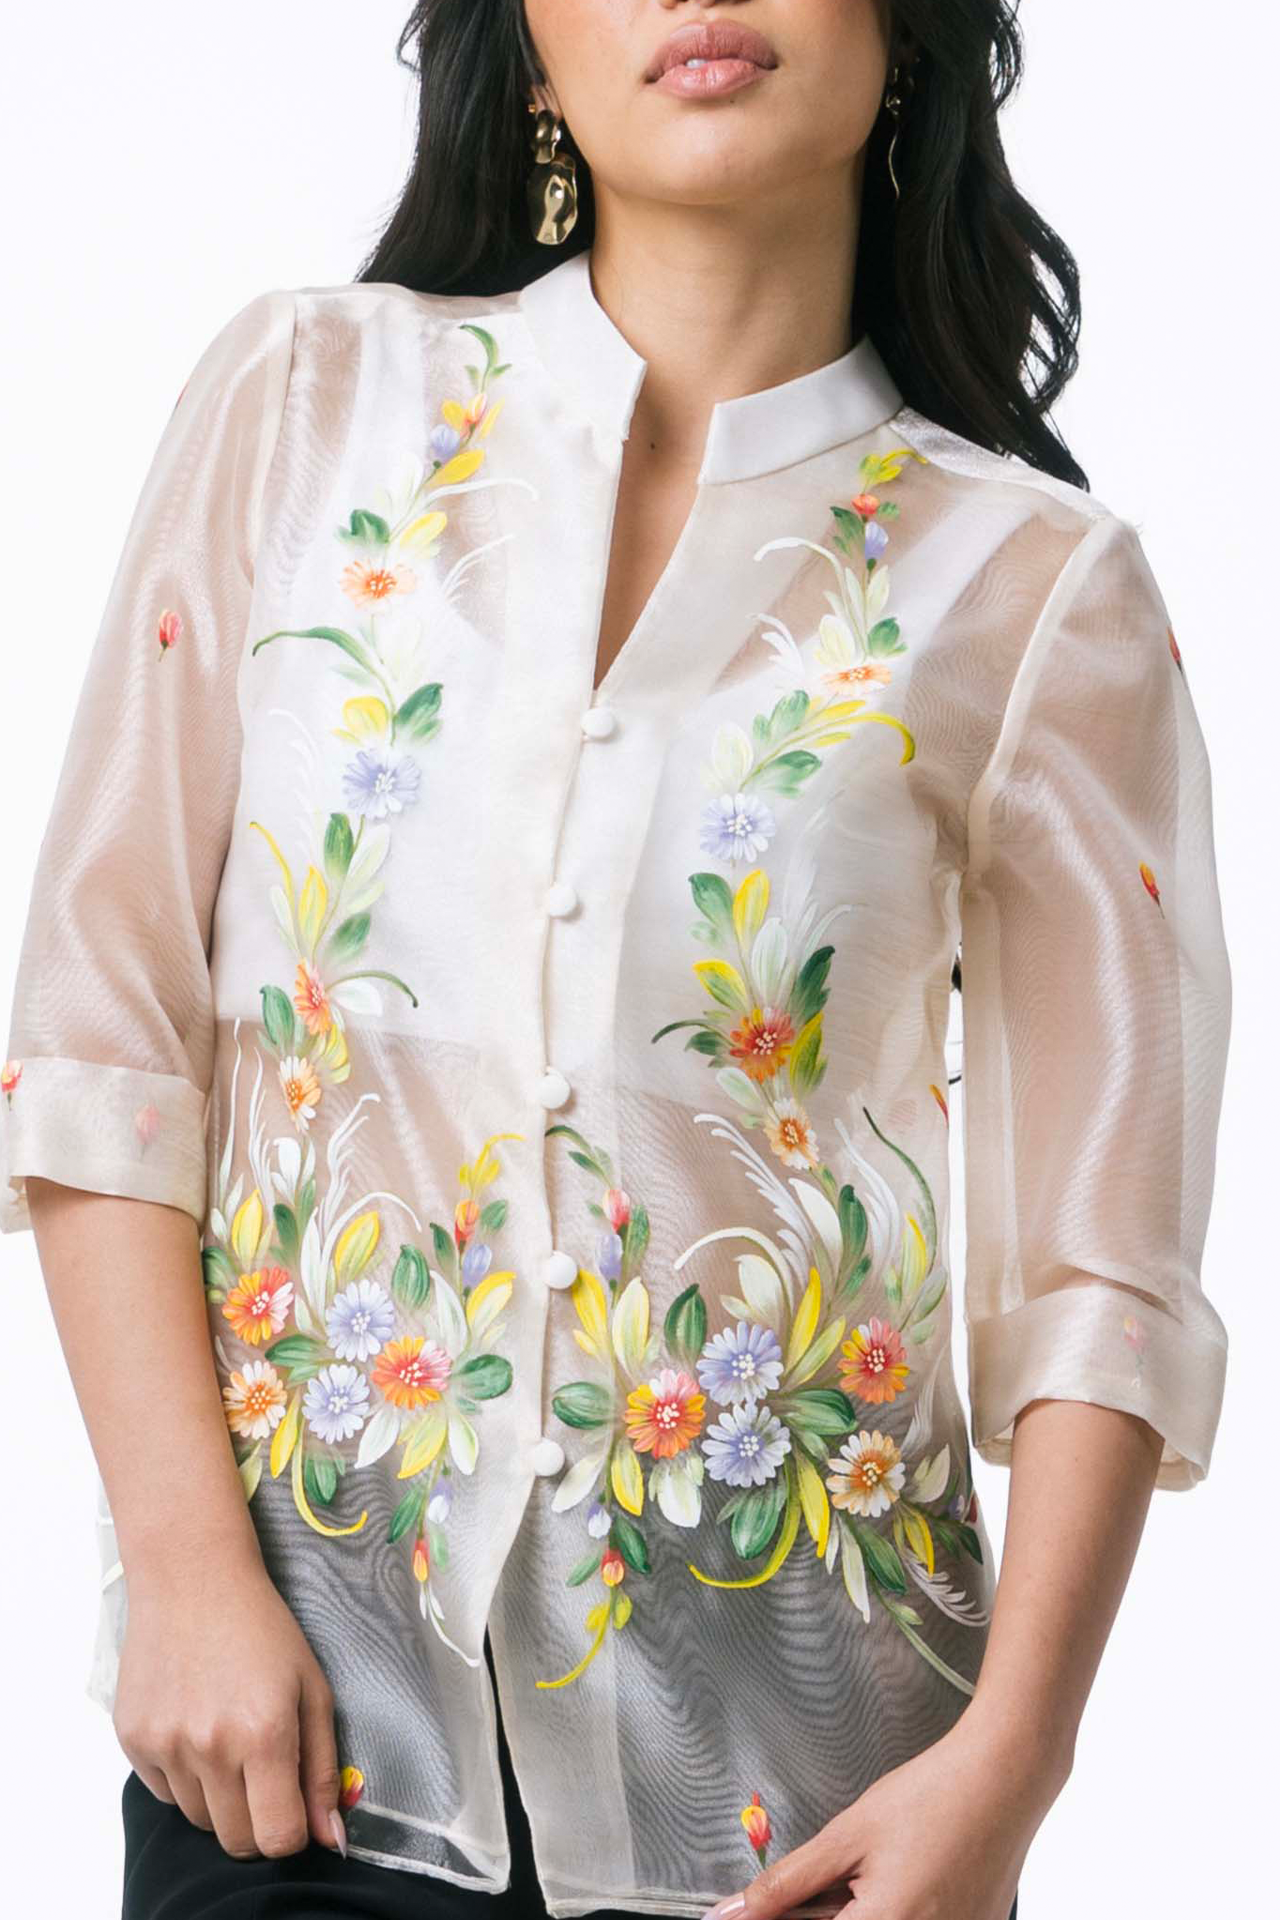 Martine Hand-Painted Lady Barong